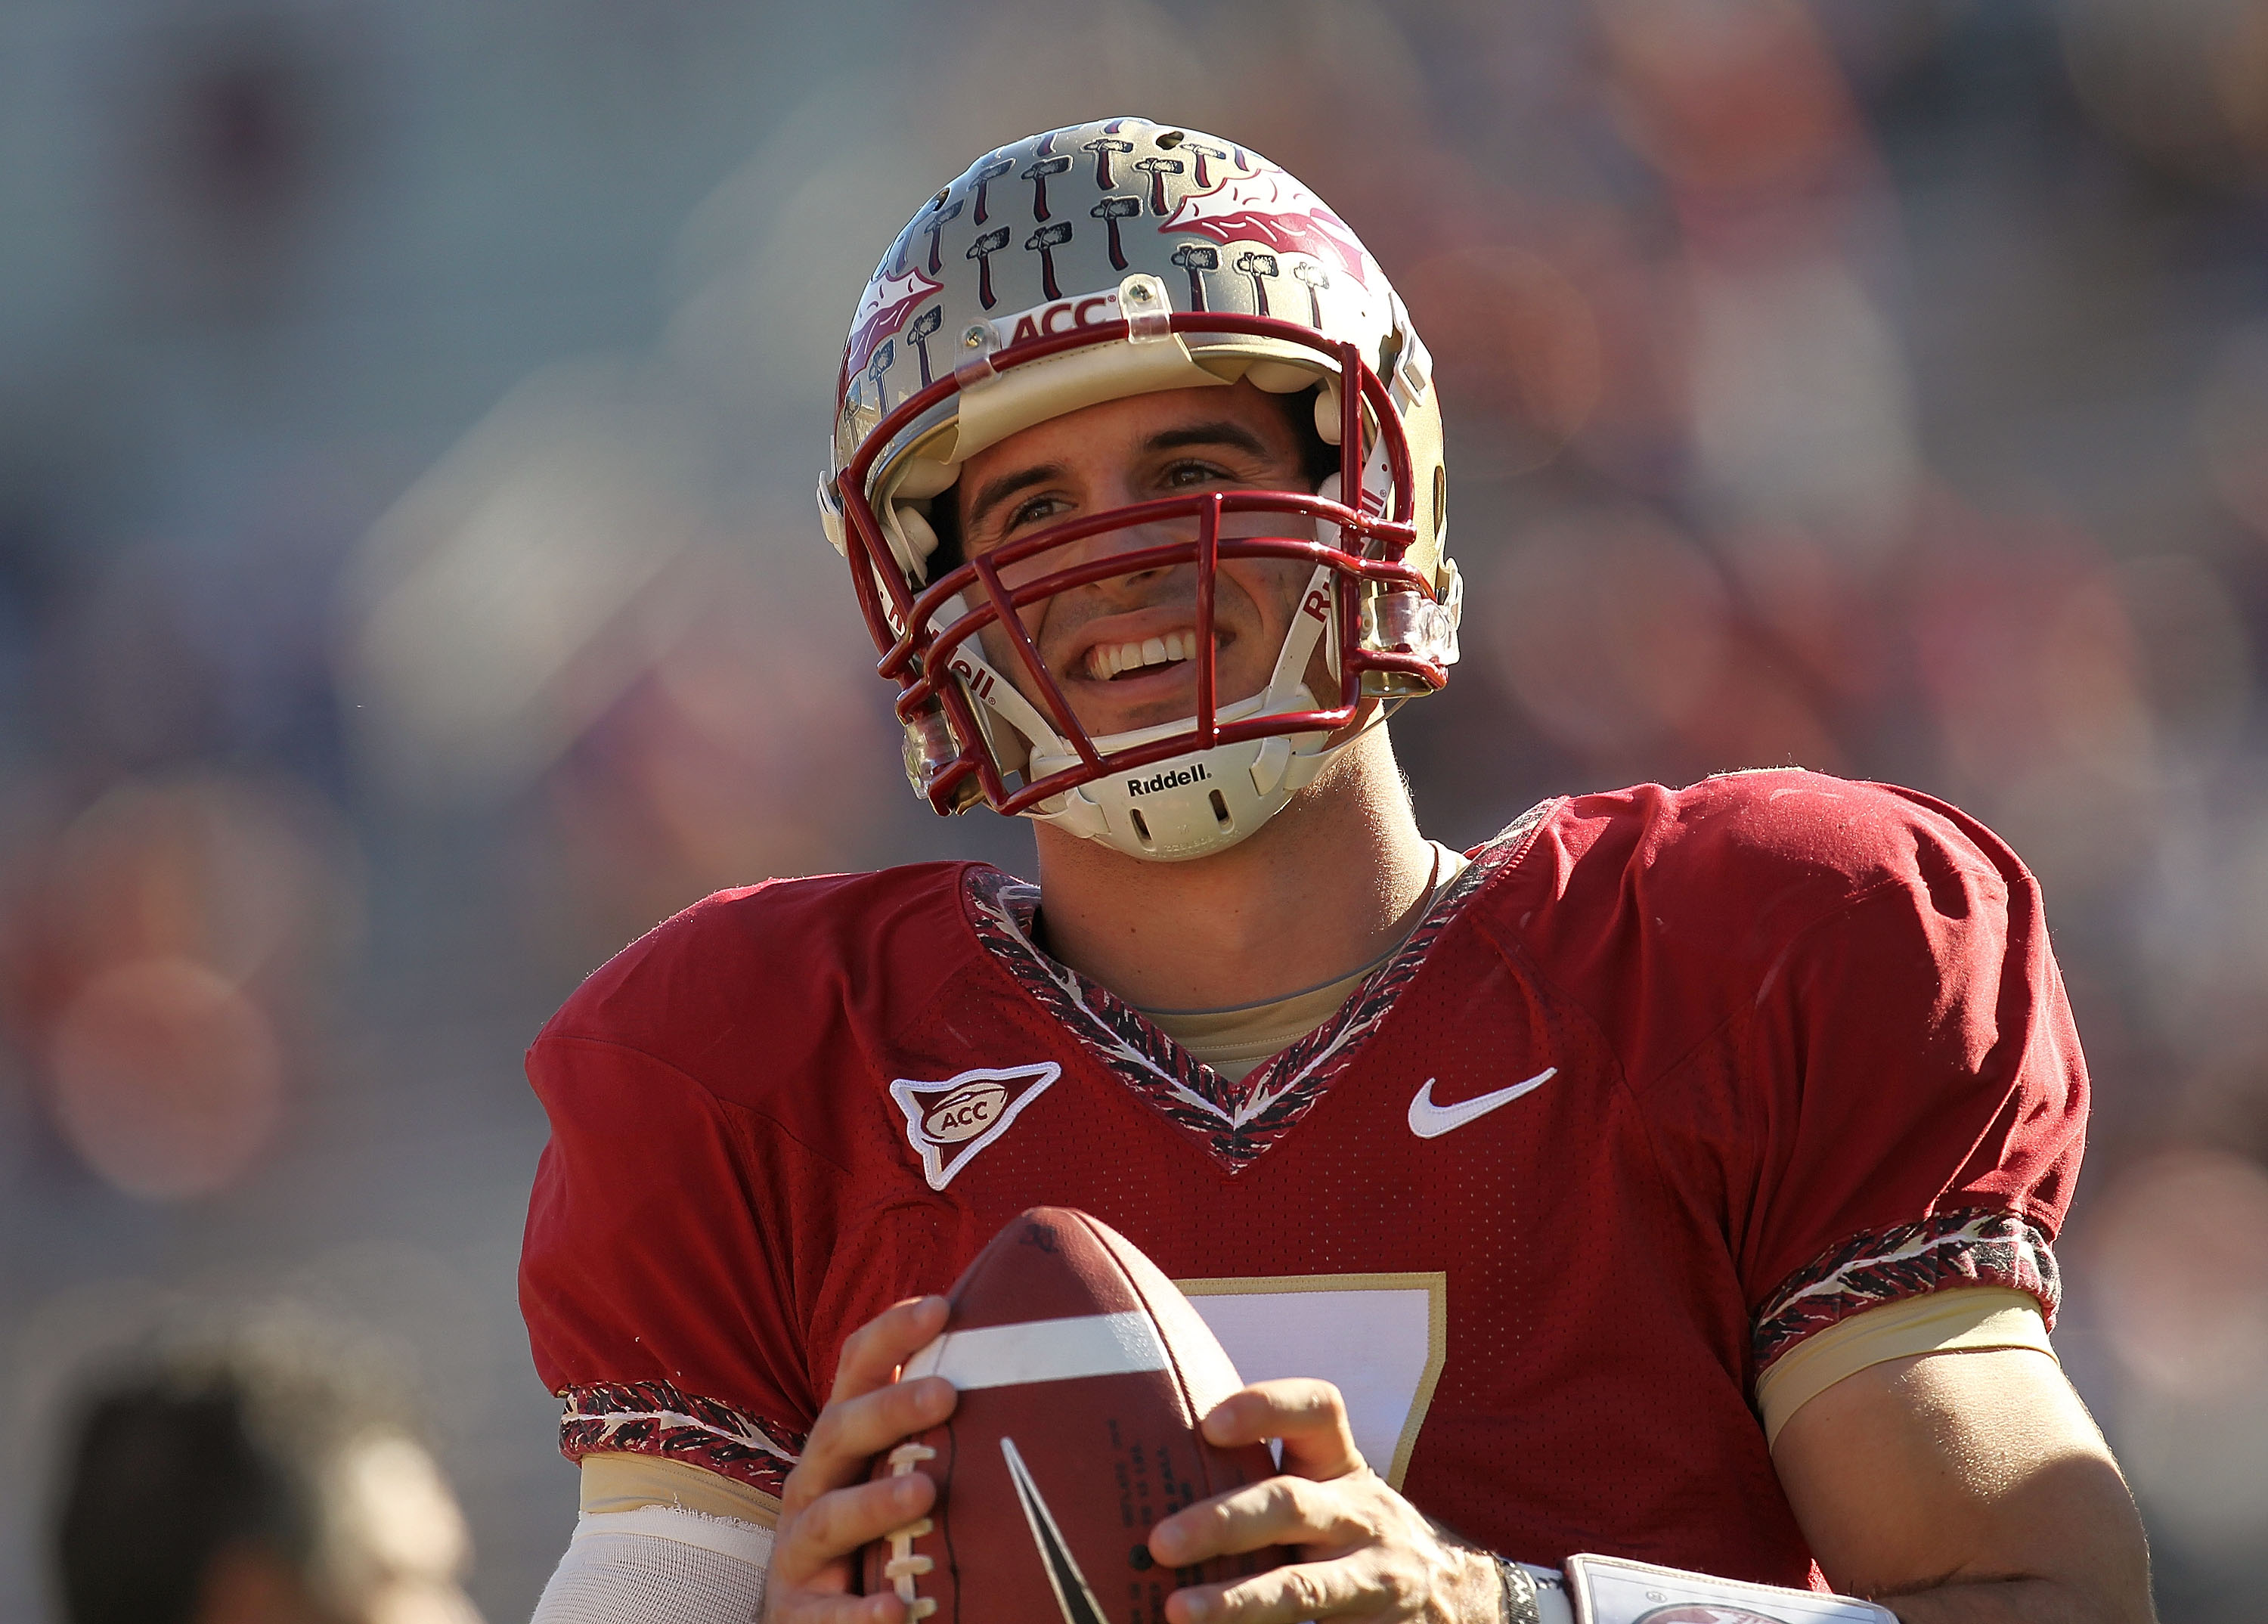 TALLAHASSEE, FL - NOVEMBER 27:  Christian Ponder #7 of the Florida State Seminoles warms up before a game against the Florida Gators at Doak Campbell Stadium on November 27, 2010 in Tallahassee, Florida.  (Photo by Mike Ehrmann/Getty Images)